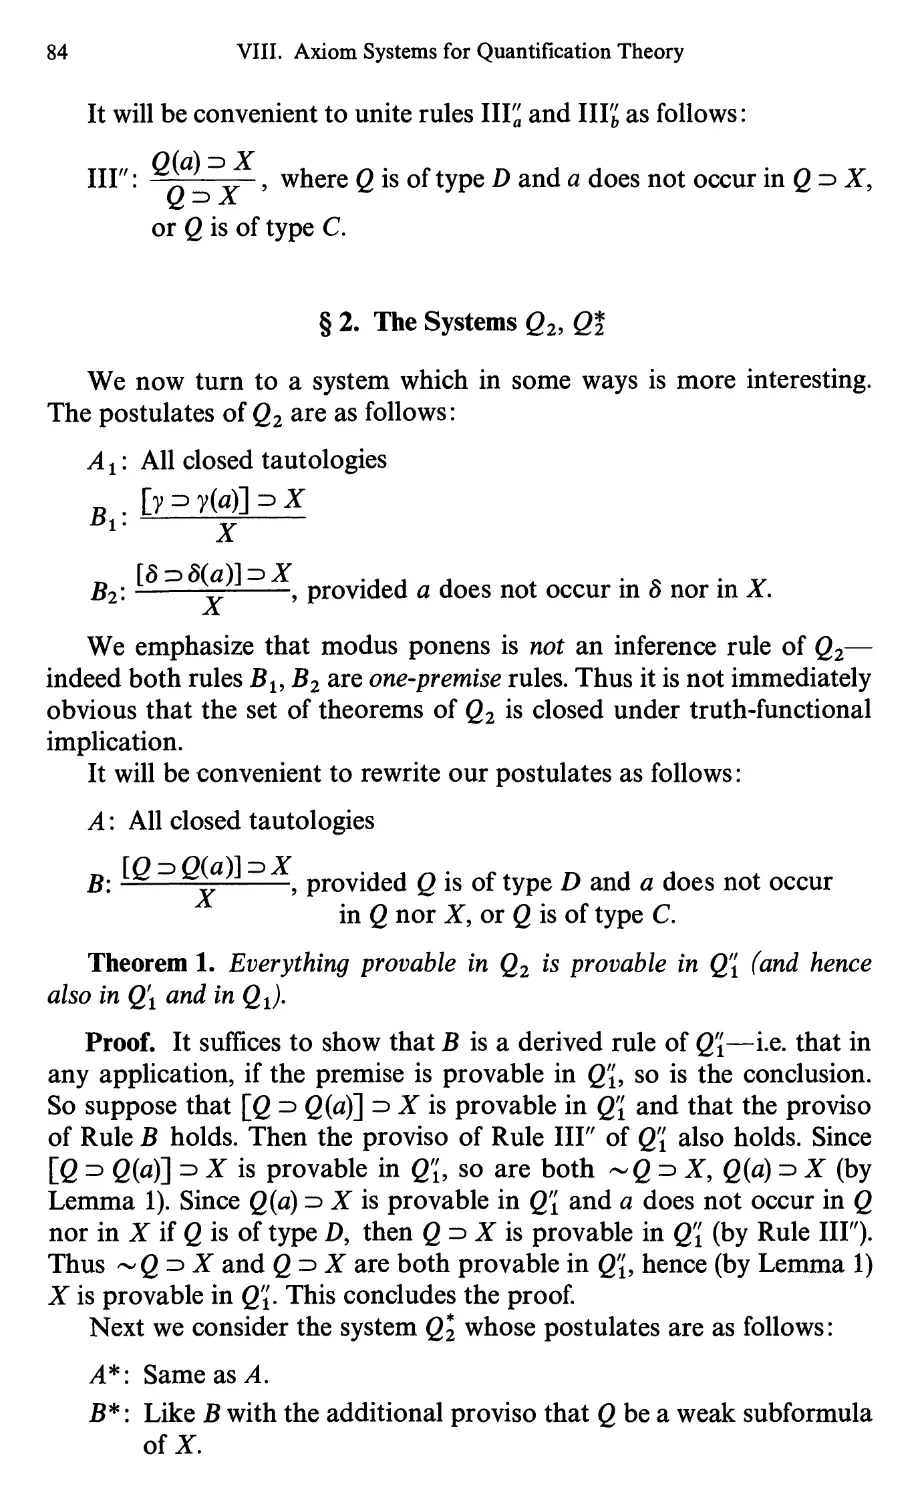 8.2 The Systems Q_2, Q_2*